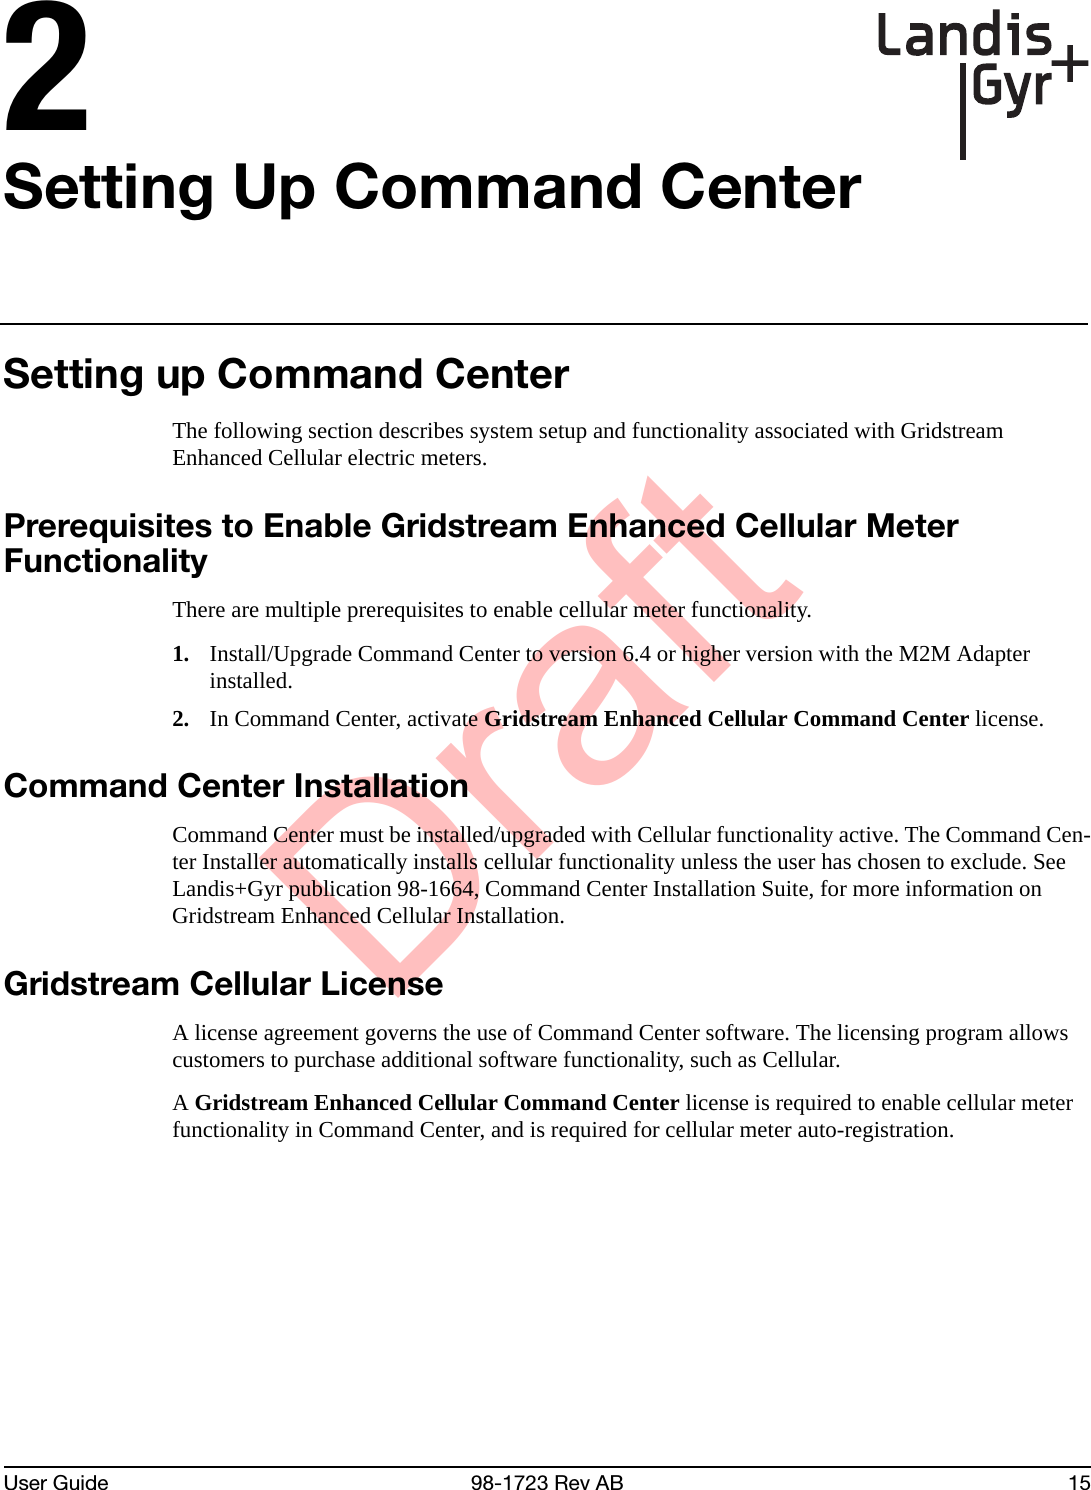 DraftUser Guide 98-1723 Rev AB 152Setting Up Command CenterSetting up Command CenterThe following section describes system setup and functionality associated with Gridstream Enhanced Cellular electric meters.Prerequisites to Enable Gridstream Enhanced Cellular Meter FunctionalityThere are multiple prerequisites to enable cellular meter functionality.1. Install/Upgrade Command Center to version 6.4 or higher version with the M2M Adapter installed.2. In Command Center, activate Gridstream Enhanced Cellular Command Center license.Command Center InstallationCommand Center must be installed/upgraded with Cellular functionality active. The Command Cen-ter Installer automatically installs cellular functionality unless the user has chosen to exclude. See Landis+Gyr publication 98-1664, Command Center Installation Suite, for more information on Gridstream Enhanced Cellular Installation.Gridstream Cellular LicenseA license agreement governs the use of Command Center software. The licensing program allows customers to purchase additional software functionality, such as Cellular.A Gridstream Enhanced Cellular Command Center license is required to enable cellular meter functionality in Command Center, and is required for cellular meter auto-registration.